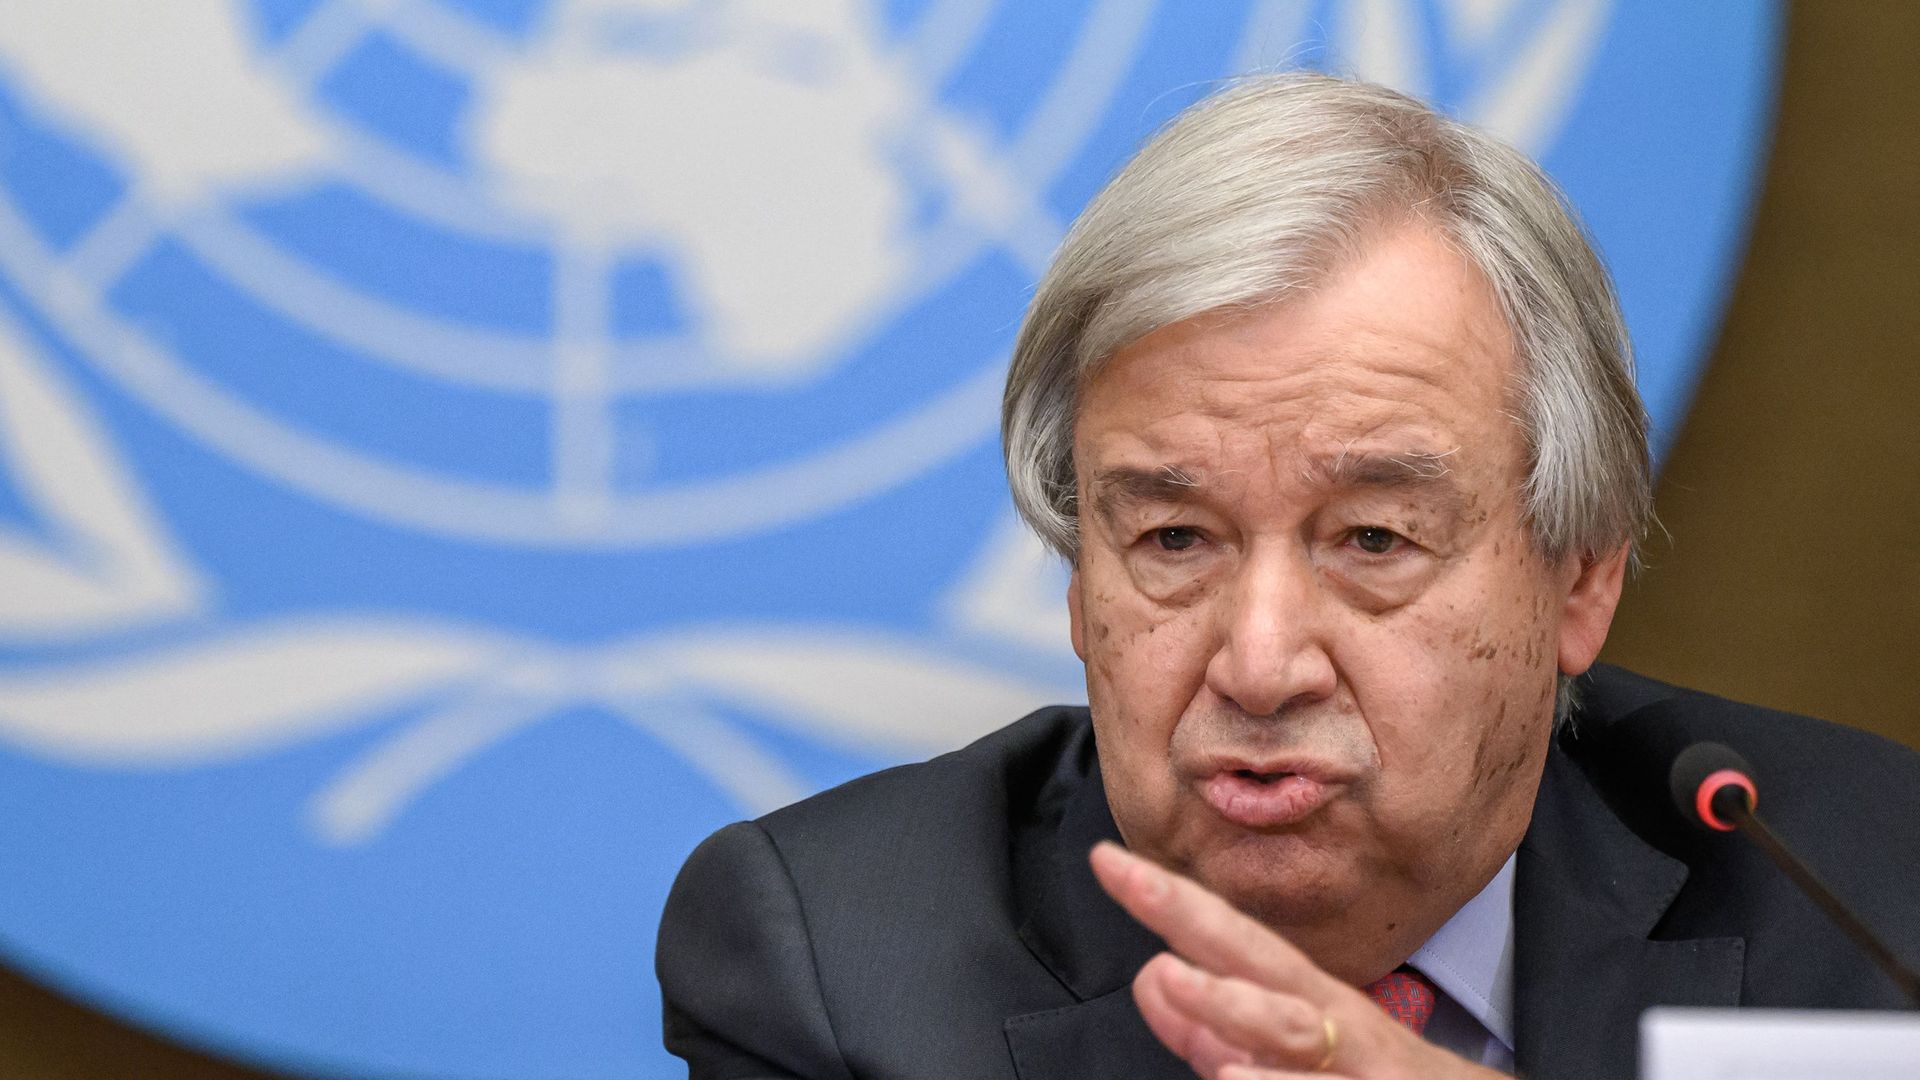 UN Secretary-General Antonio Guterres gestures during a press conference on a hosts aid conference on Afghanistan, in Geneva on September 13